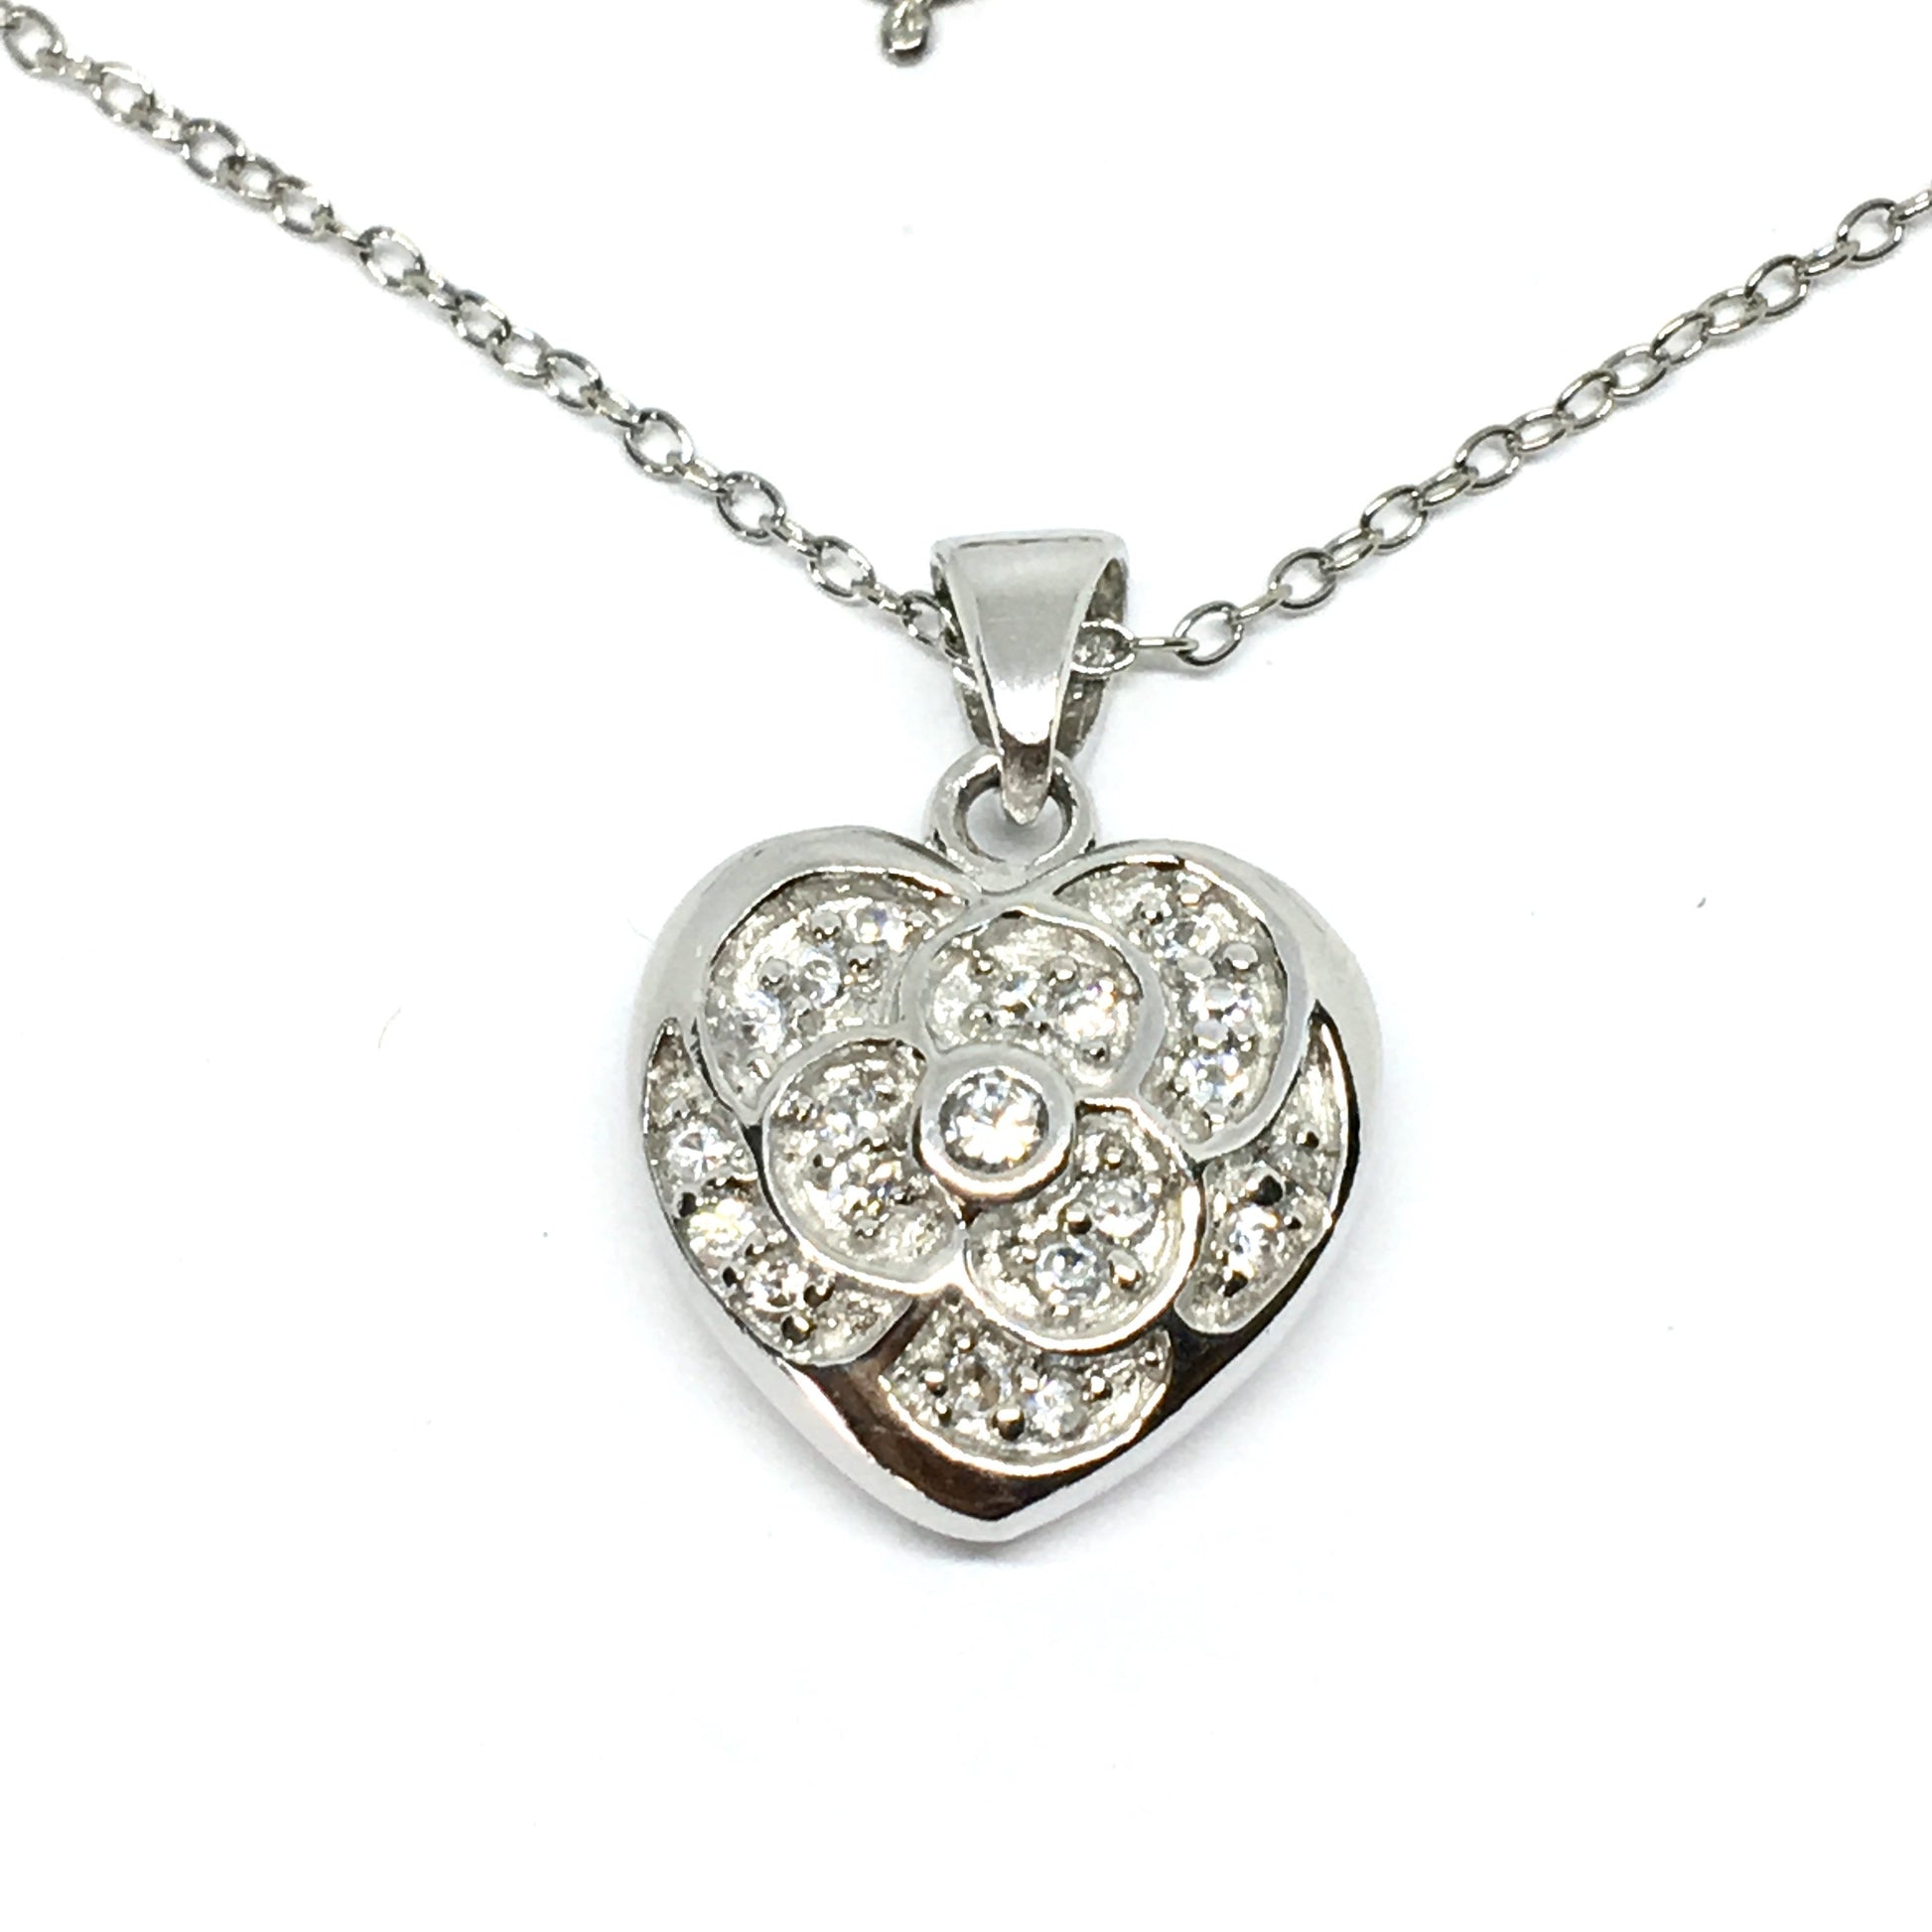 Jewelry - Womens Sterling Silver Romantic Cz Pansy Flower Heart Pendant Necklace -  New Overstock Fine Jewelry online at Blingschlingers.com USA